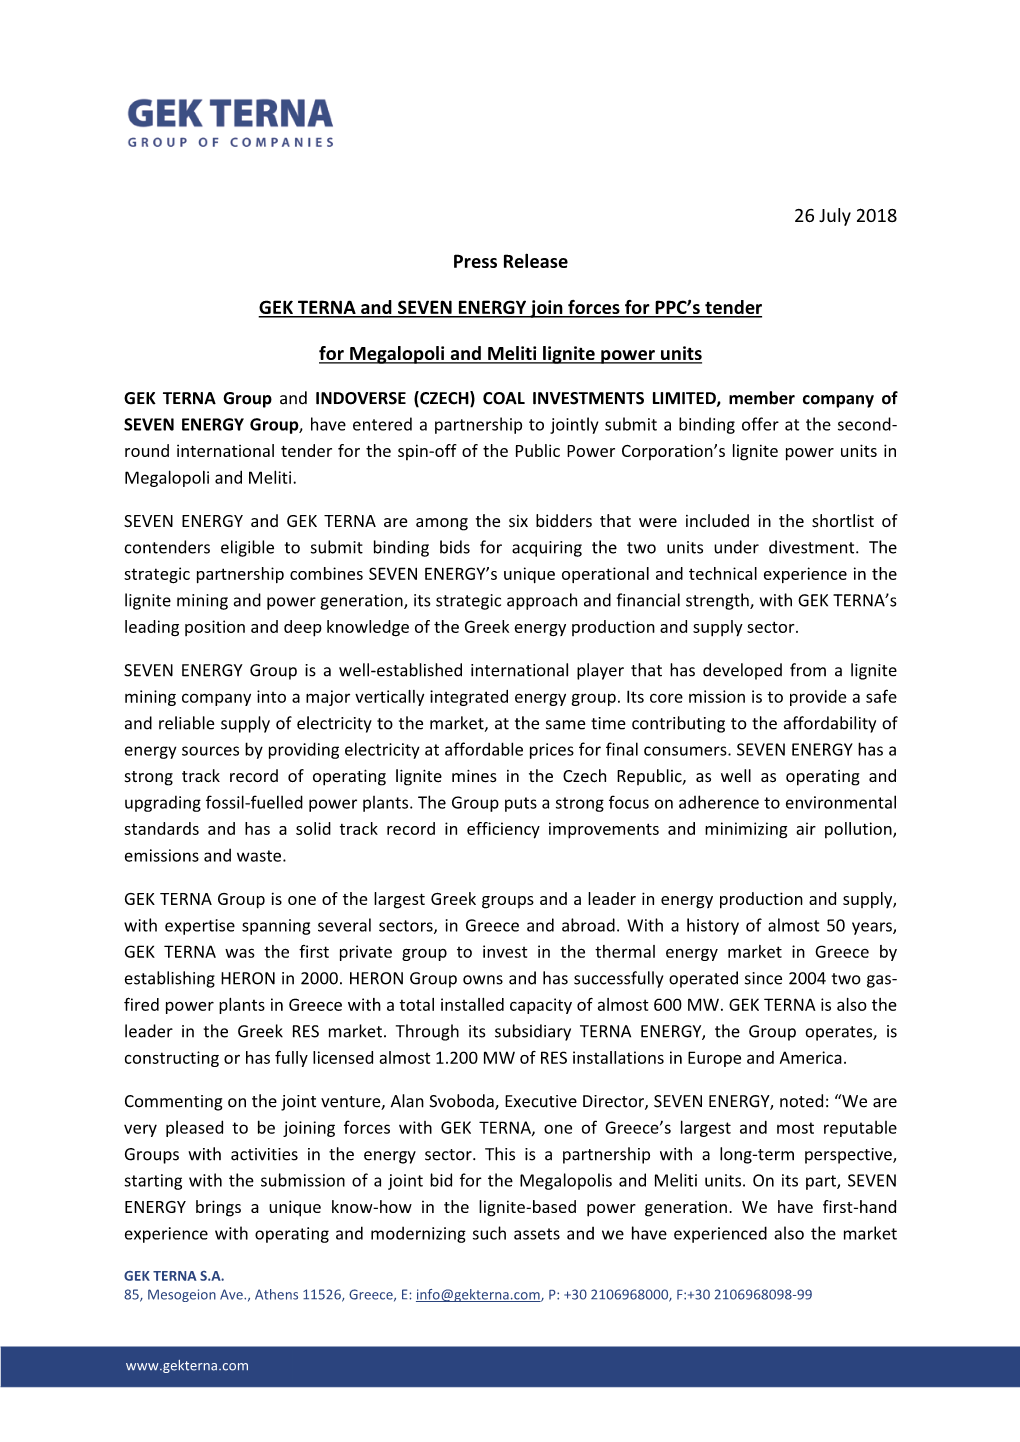 26 July 2018 Press Release GEK TERNA and SEVEN ENERGY Join Forces for PPC's Tender for Megalopoli and Meliti Lignite Power